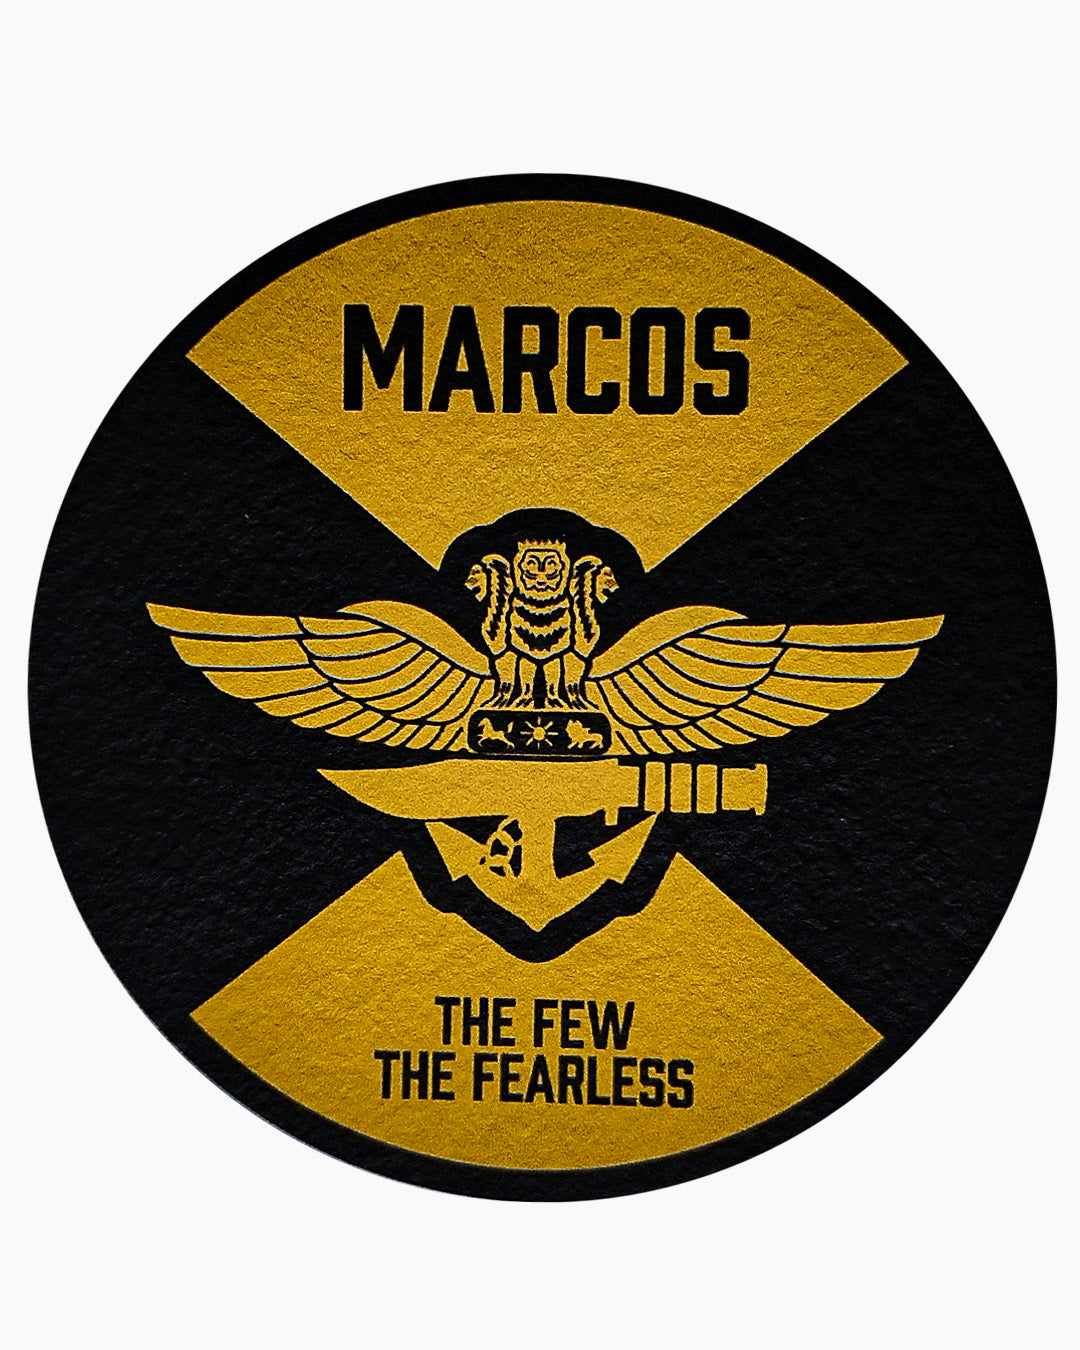 MARCOS THE FEW THE FEARLESS Patch